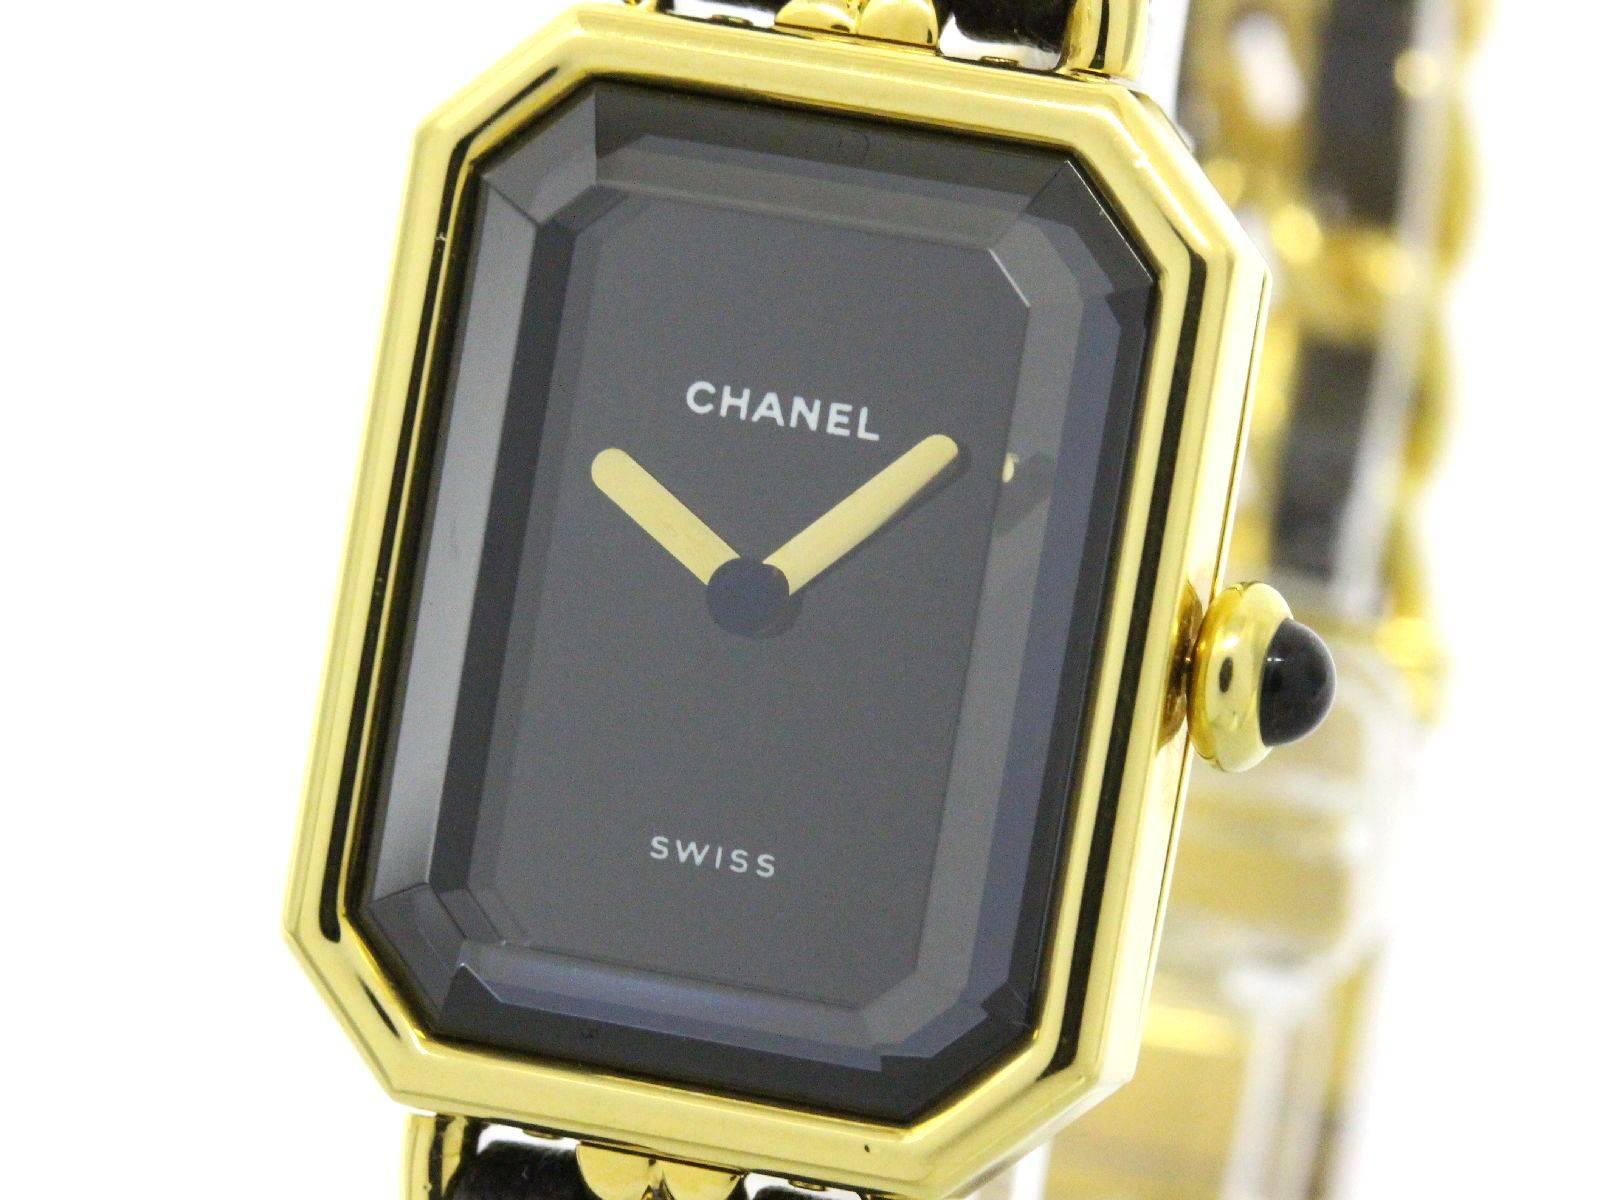 CURATOR'S NOTES

The epitome of a timeless classic, the Chanel Premiere watch boasts chain link plated gold and leather making it a vintage treasure you will return to again and again. 

Gold plated 
Leather
Quartz movement
Black dial
Case